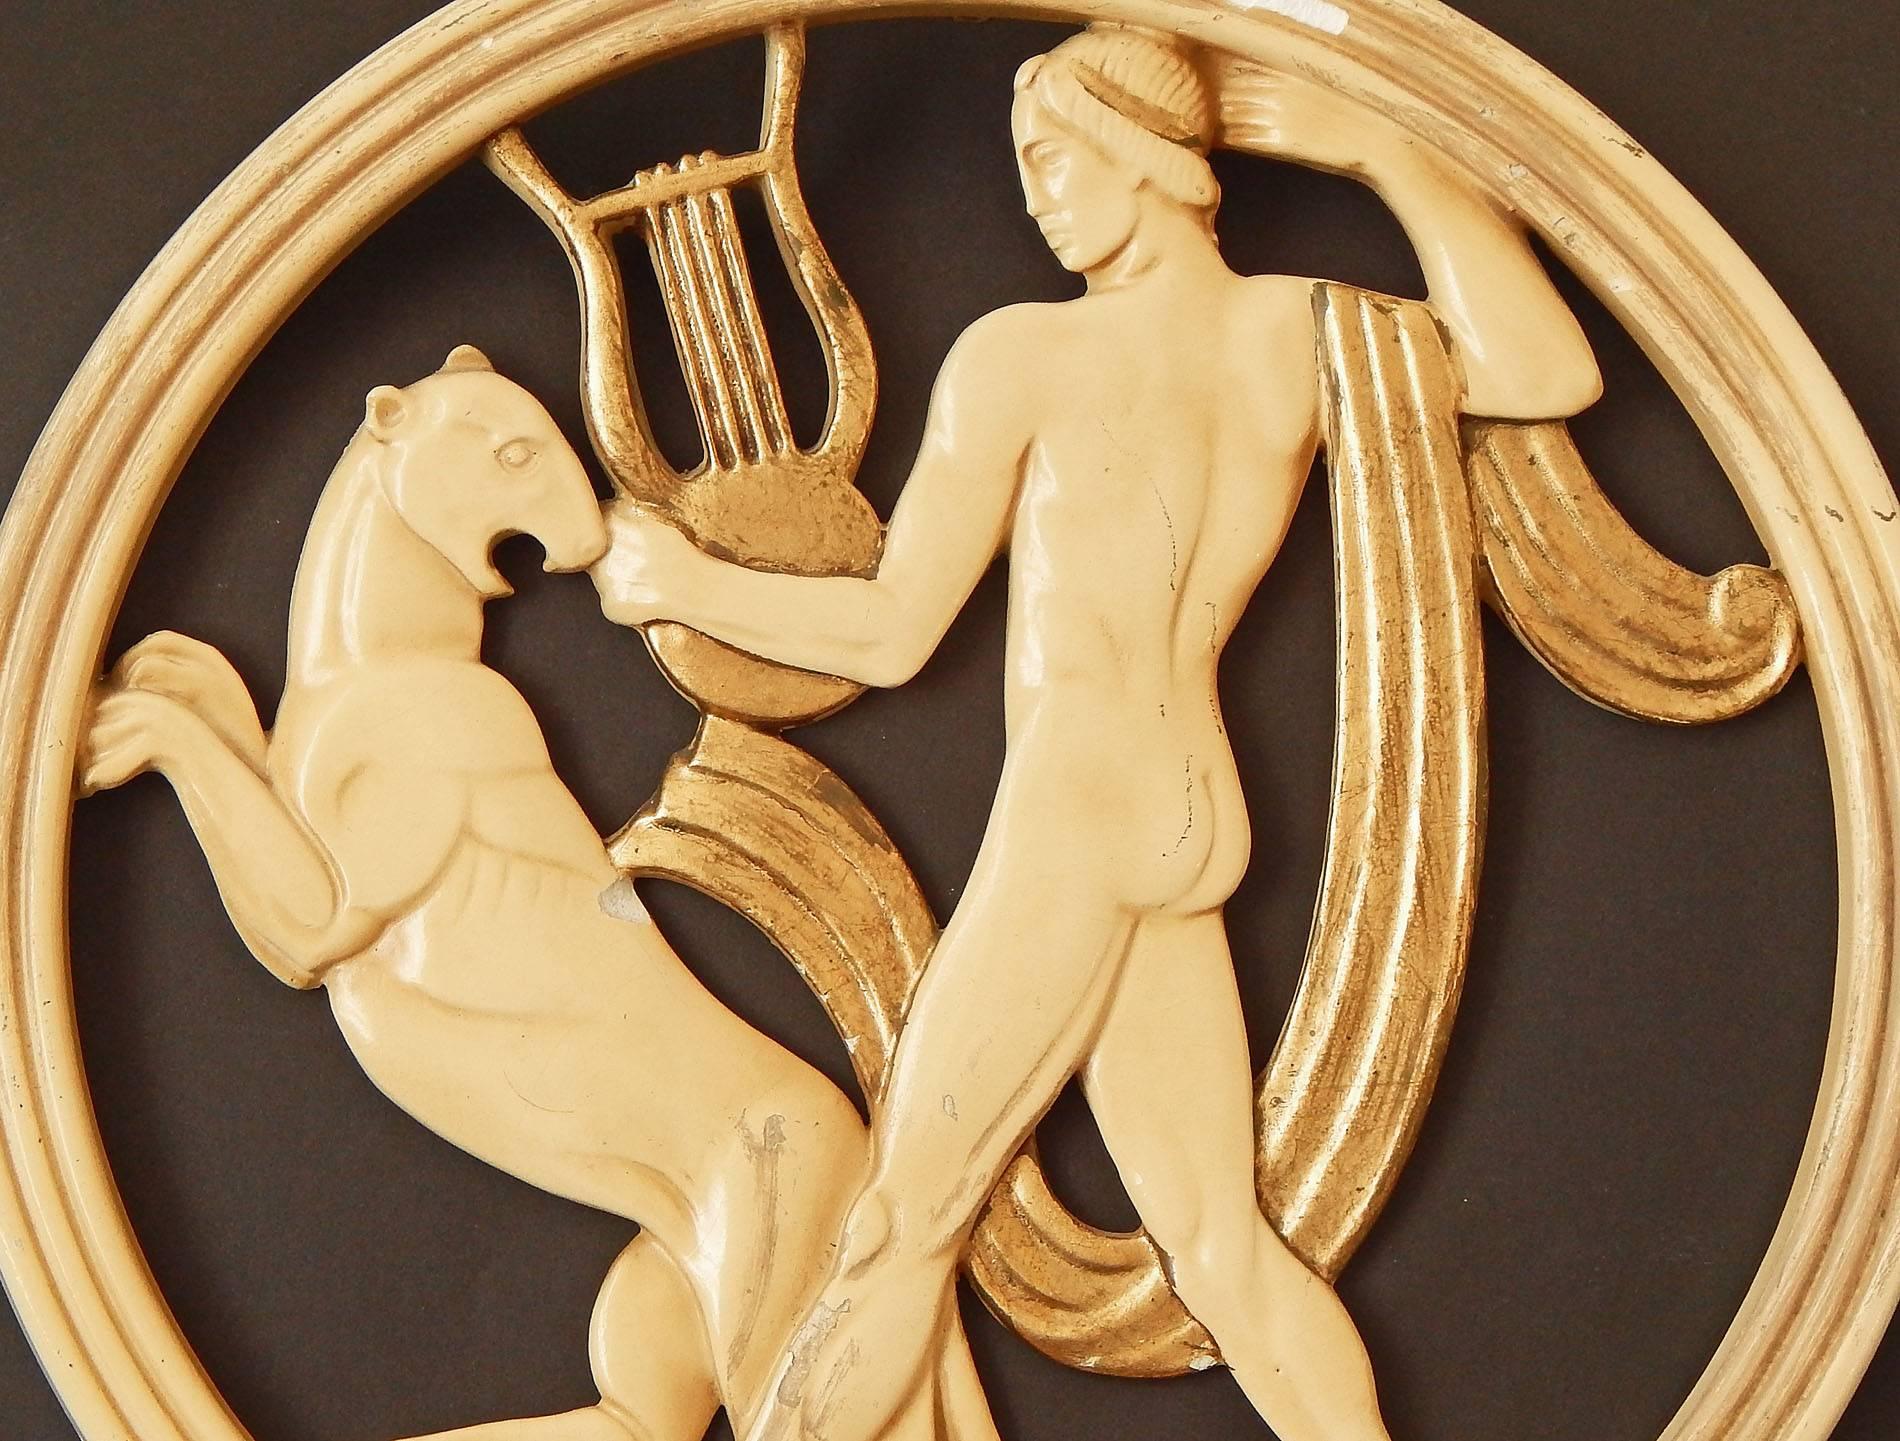 Silkily finished in tones of cream and gold, with very fine bas relief detail, this pair of mythological panels was produced by the New Art Wares company in the 1930s. One panel depicts a nude Orpheus with his lyre, accompanied by a rearing panther,